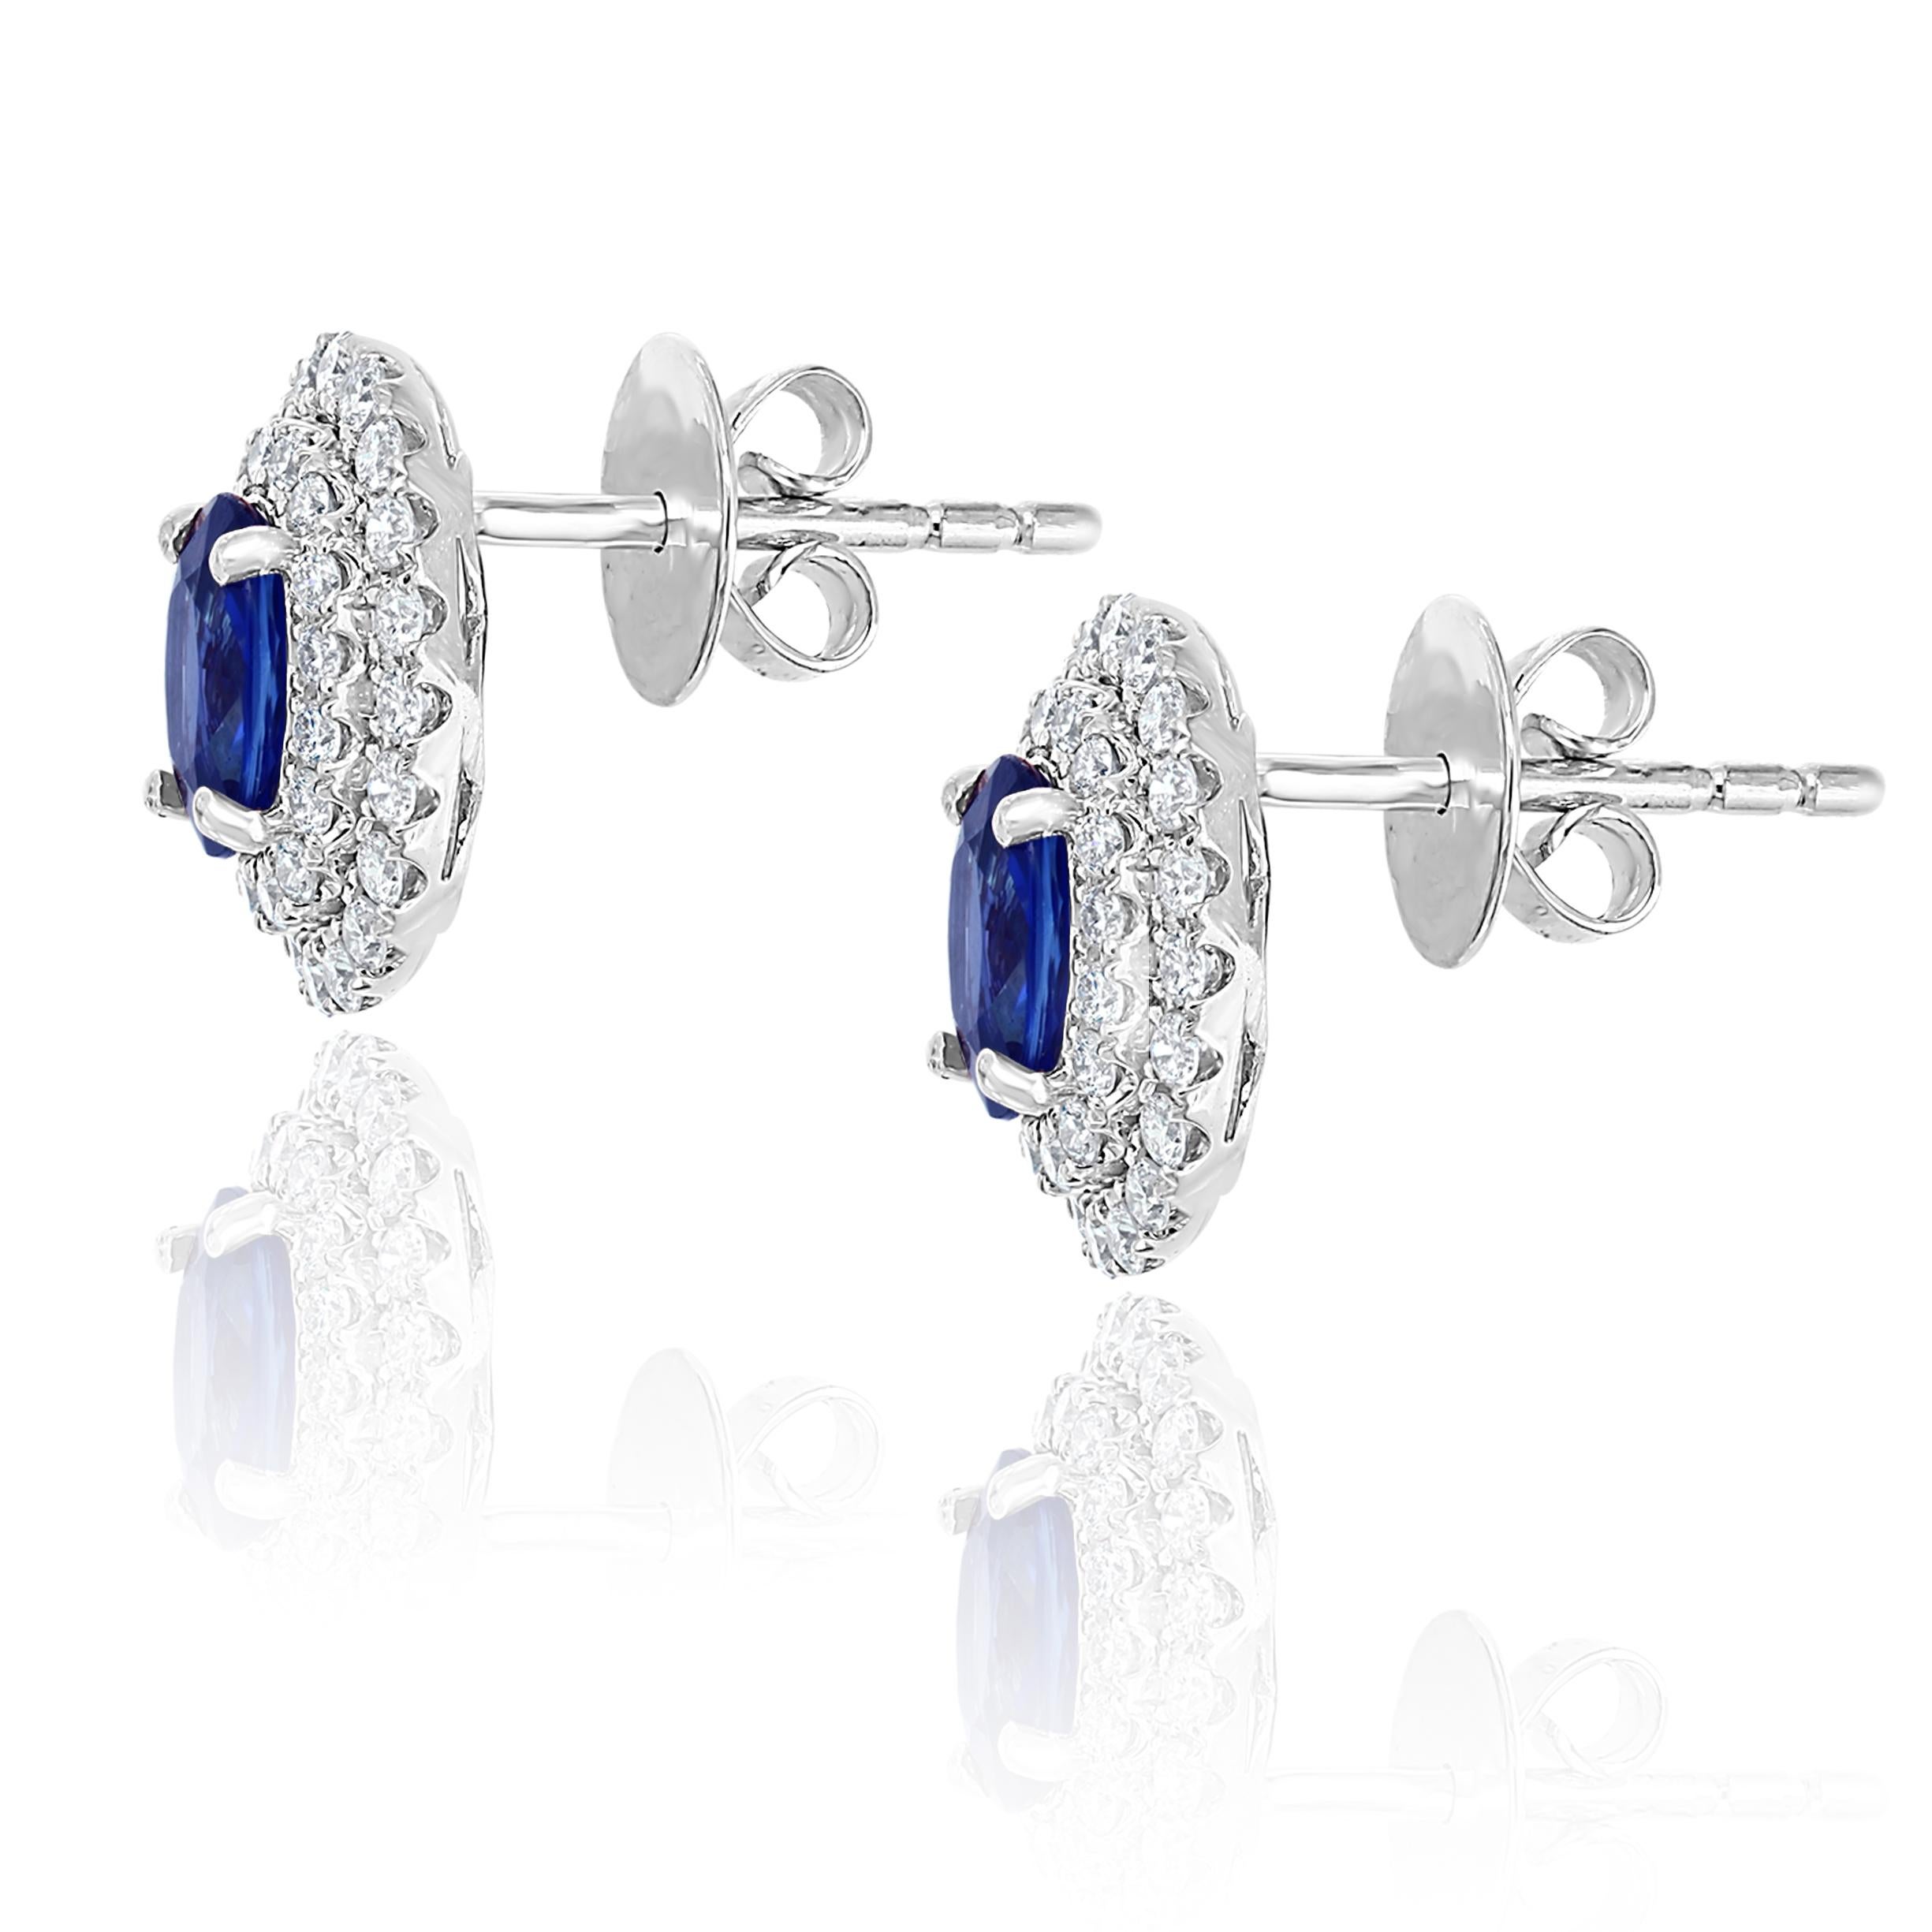 Contemporary 1.03 Carat Oval Cut Blue Sapphire and Diamond Stud Earrings in 18K White Gold For Sale